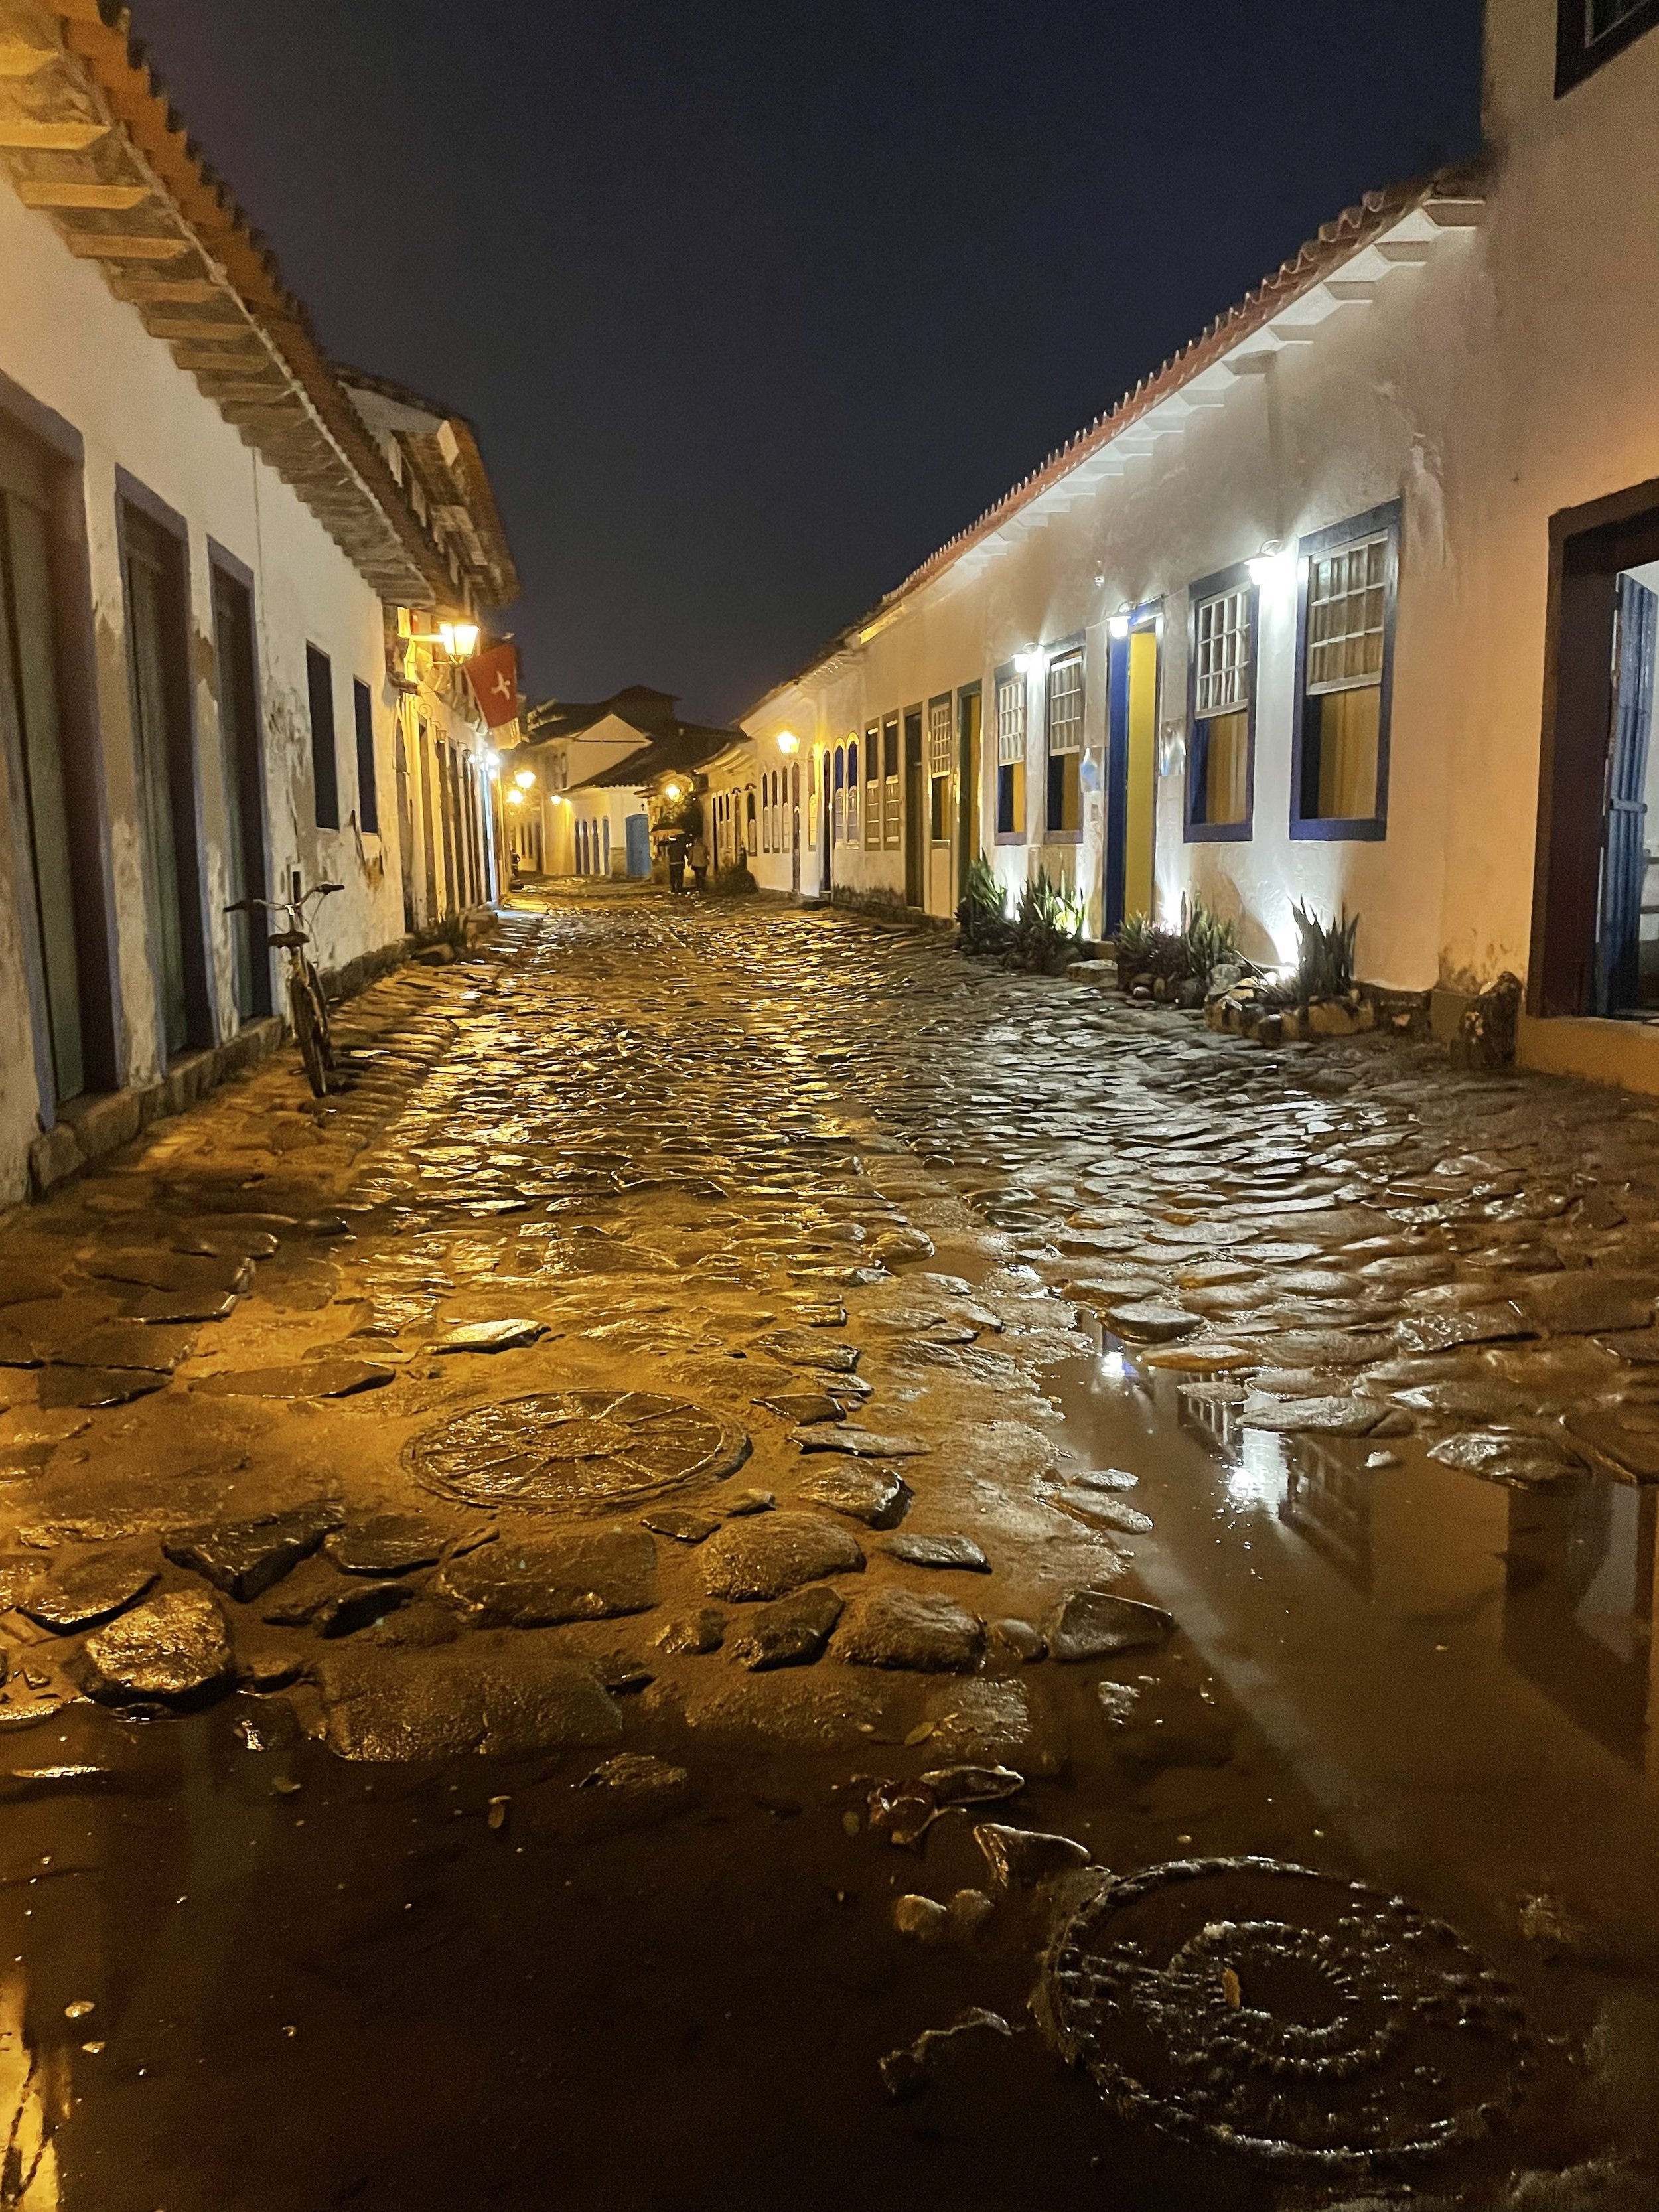  The beauty of the Old Town of Paraty at night 